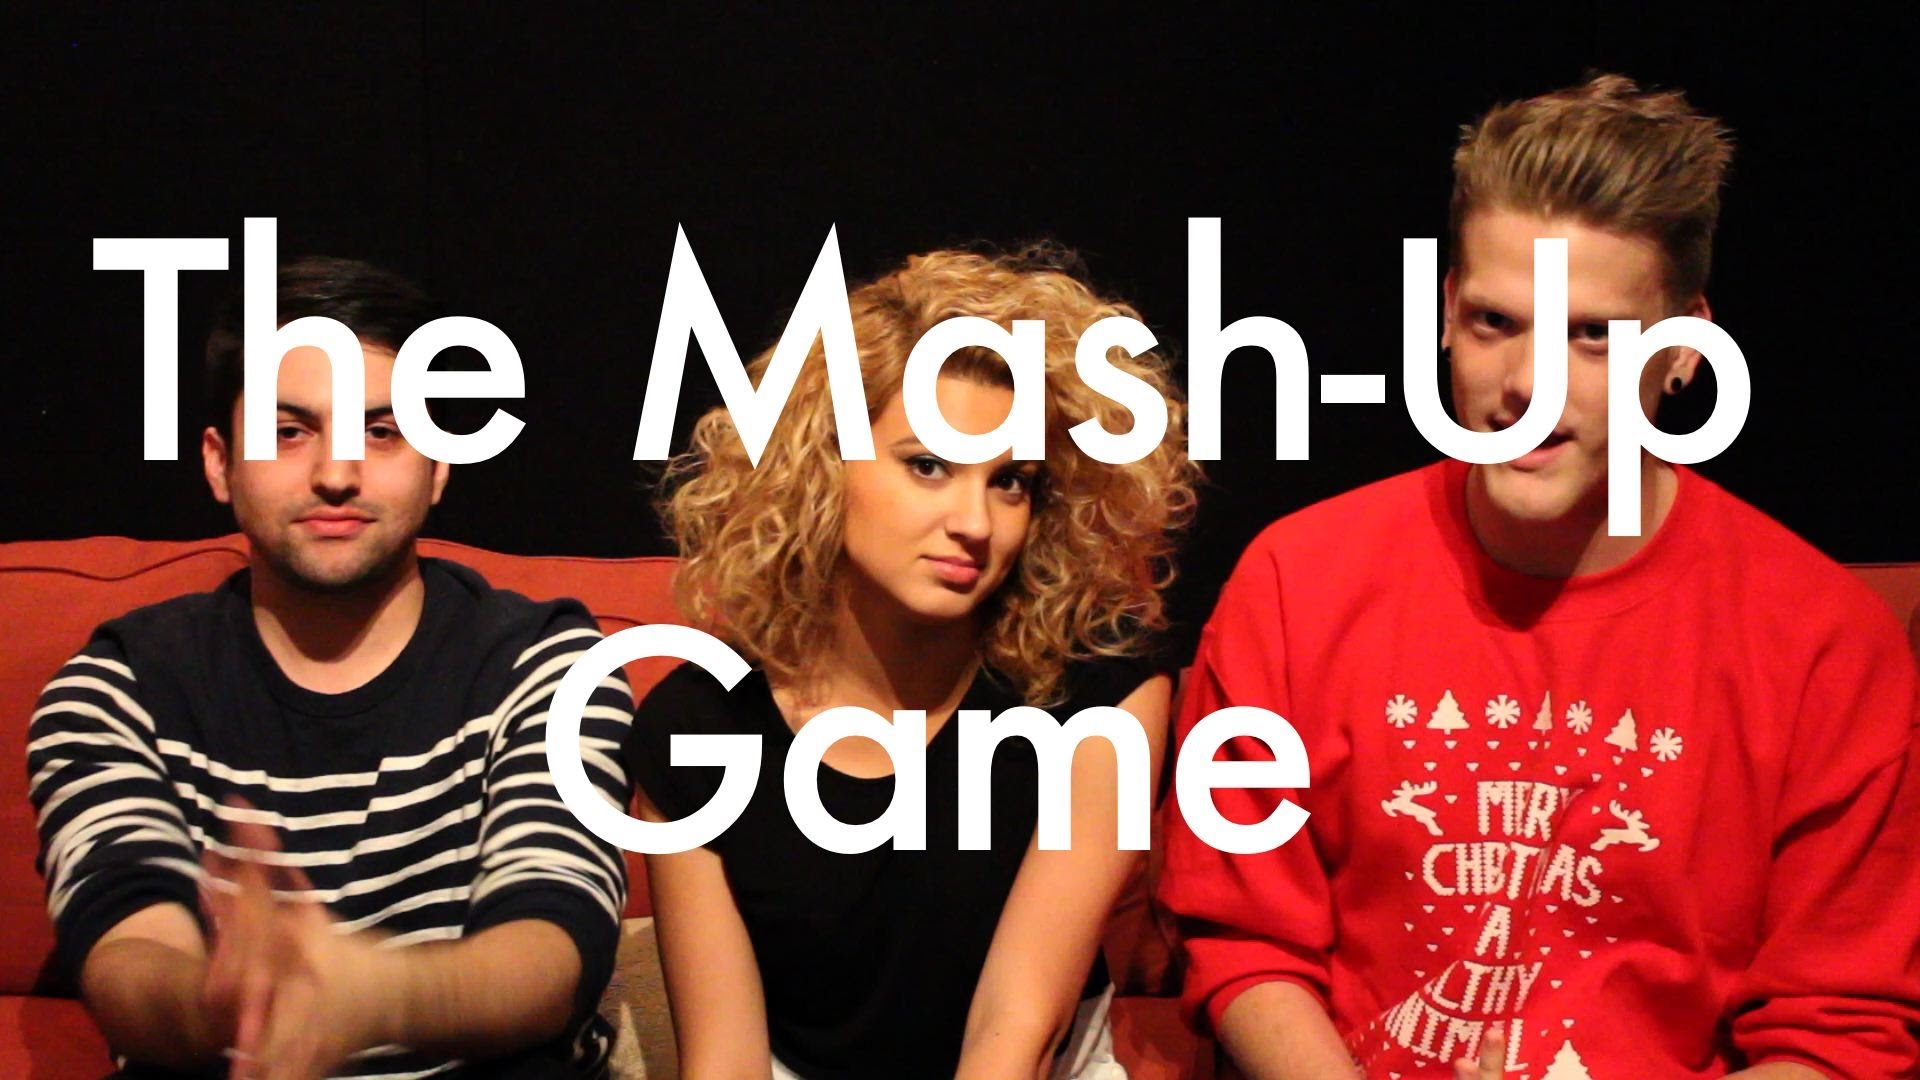 1920x1080 > The Mash Wallpapers